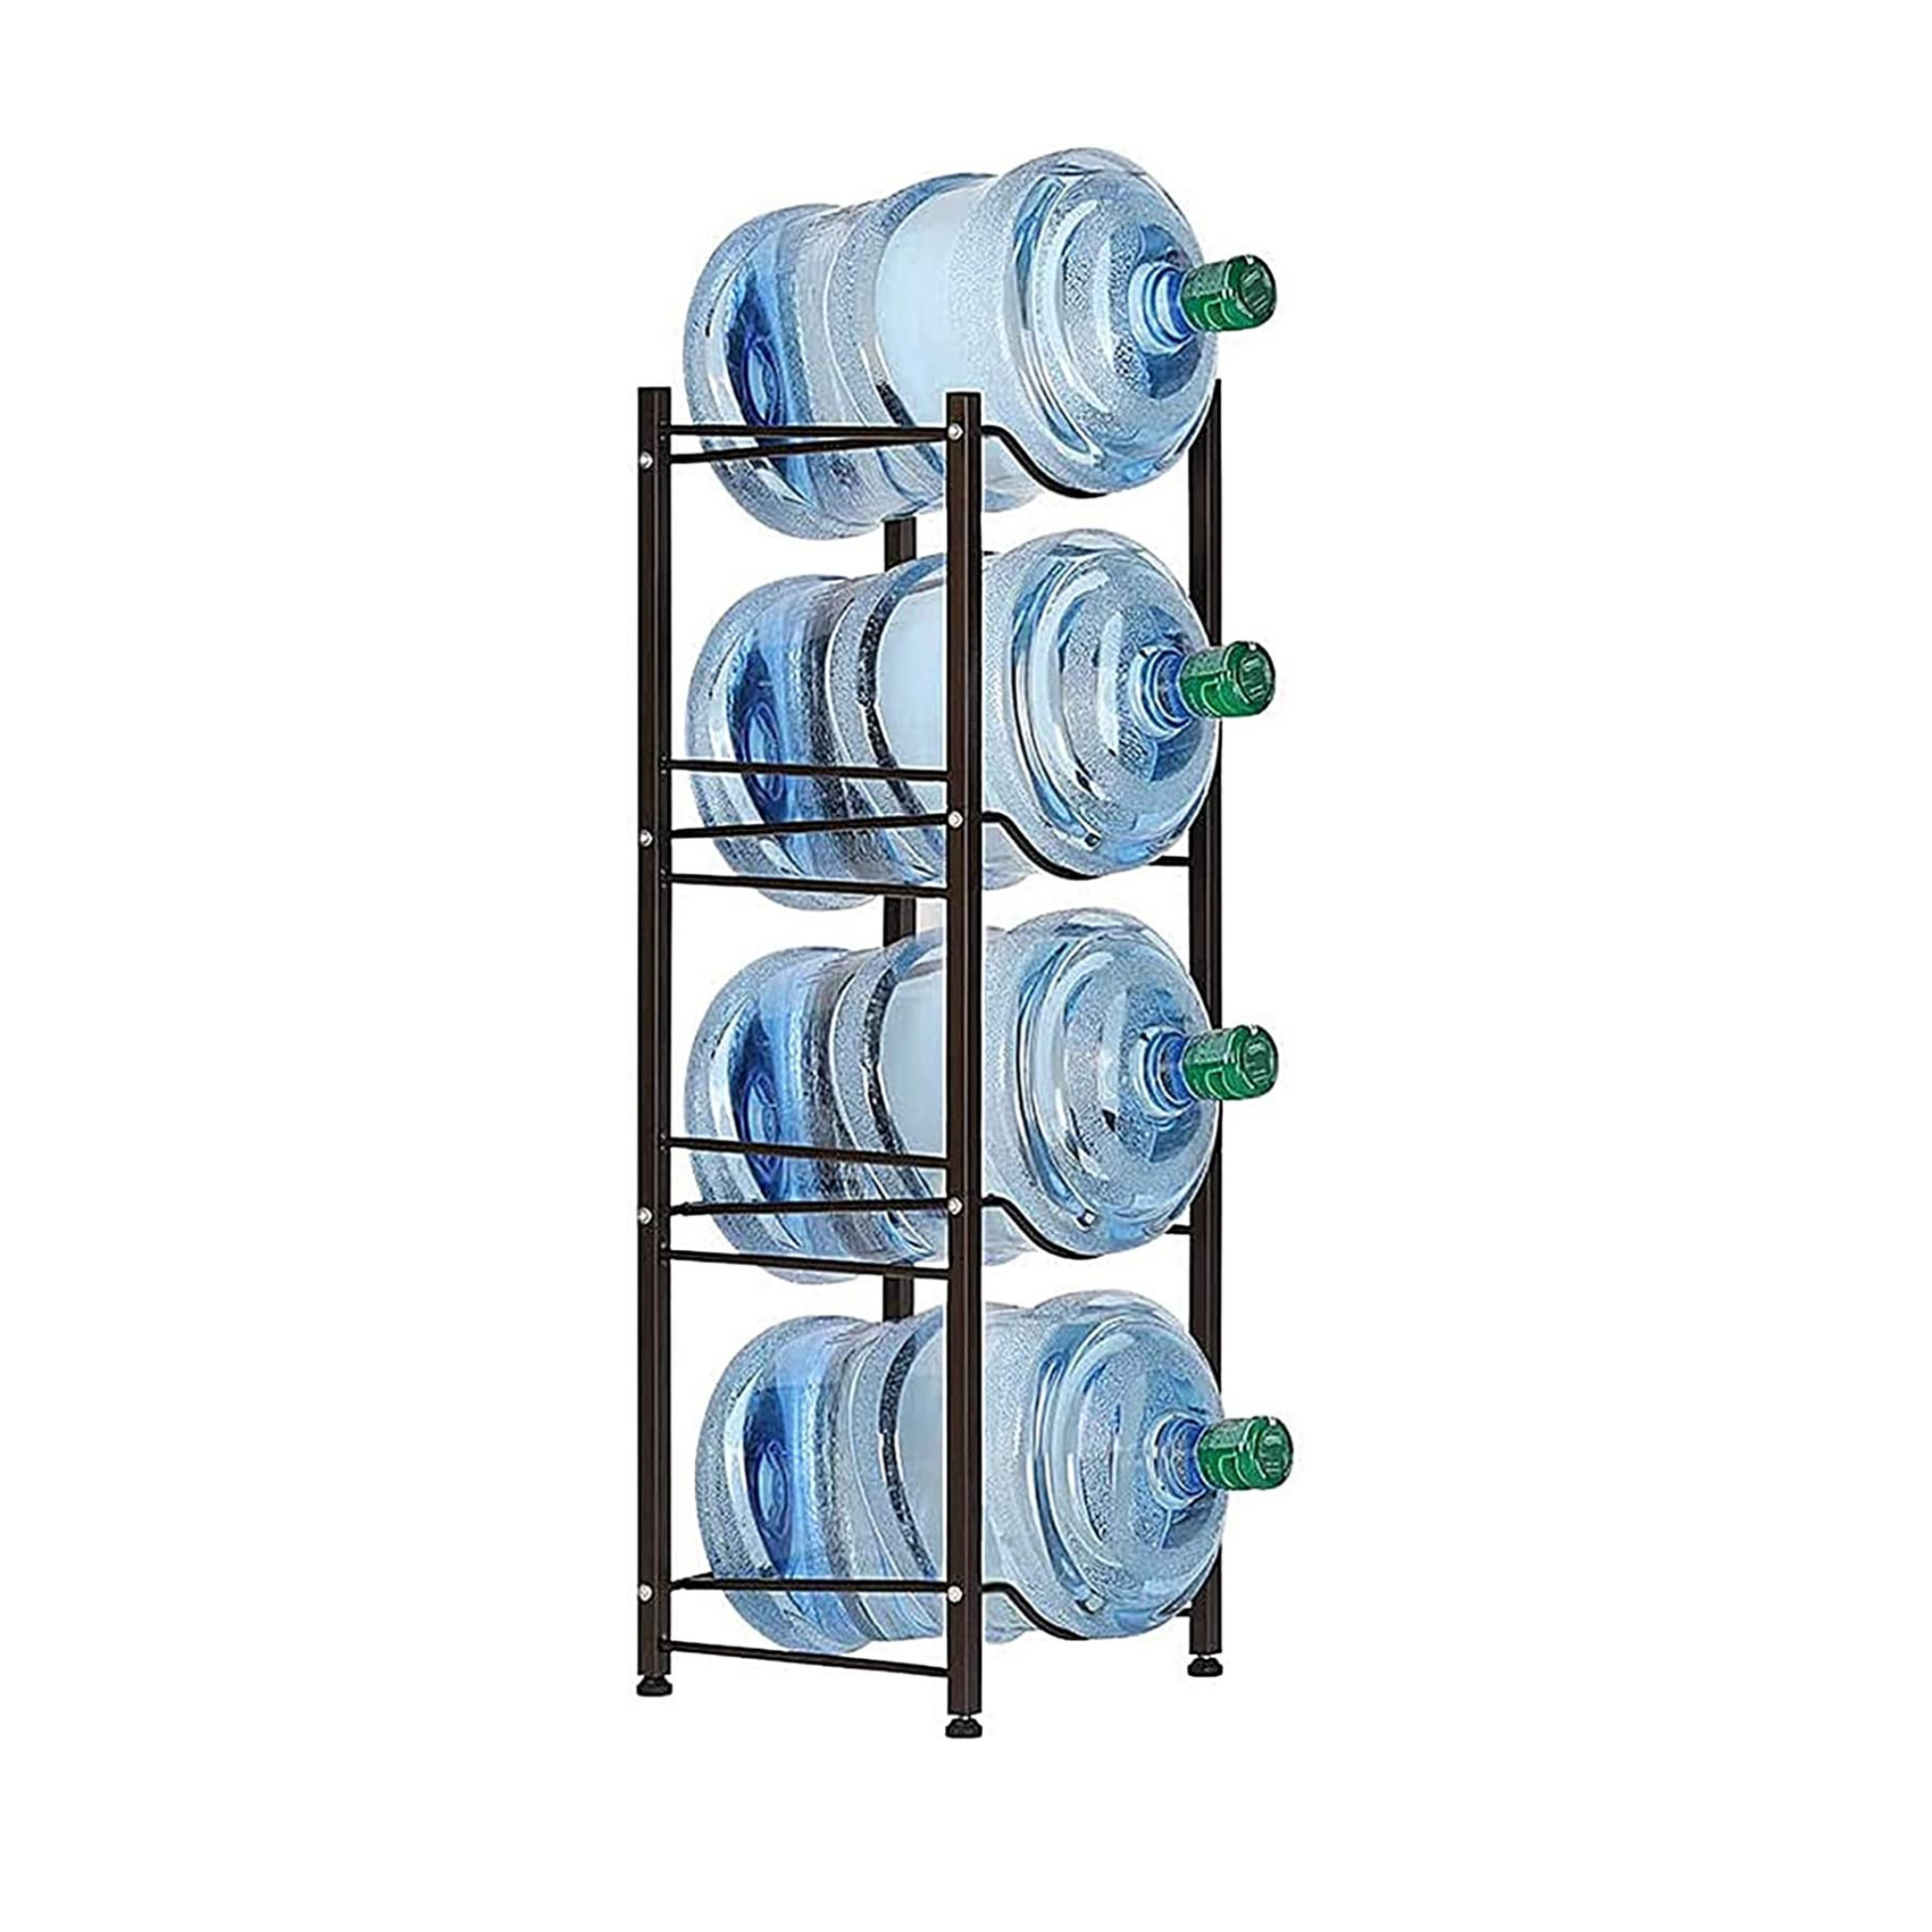 Organize your water bottles in style with our 4-Tier 5-Gallon Water Bottle Rack in dark brown. Made of sturdy steel with a rustproof finish, it can hold up to four water bottles and measures 13.39 x 13.07 x 52.95 inches. Perfect for kitchens, breakrooms, offices, and classrooms.